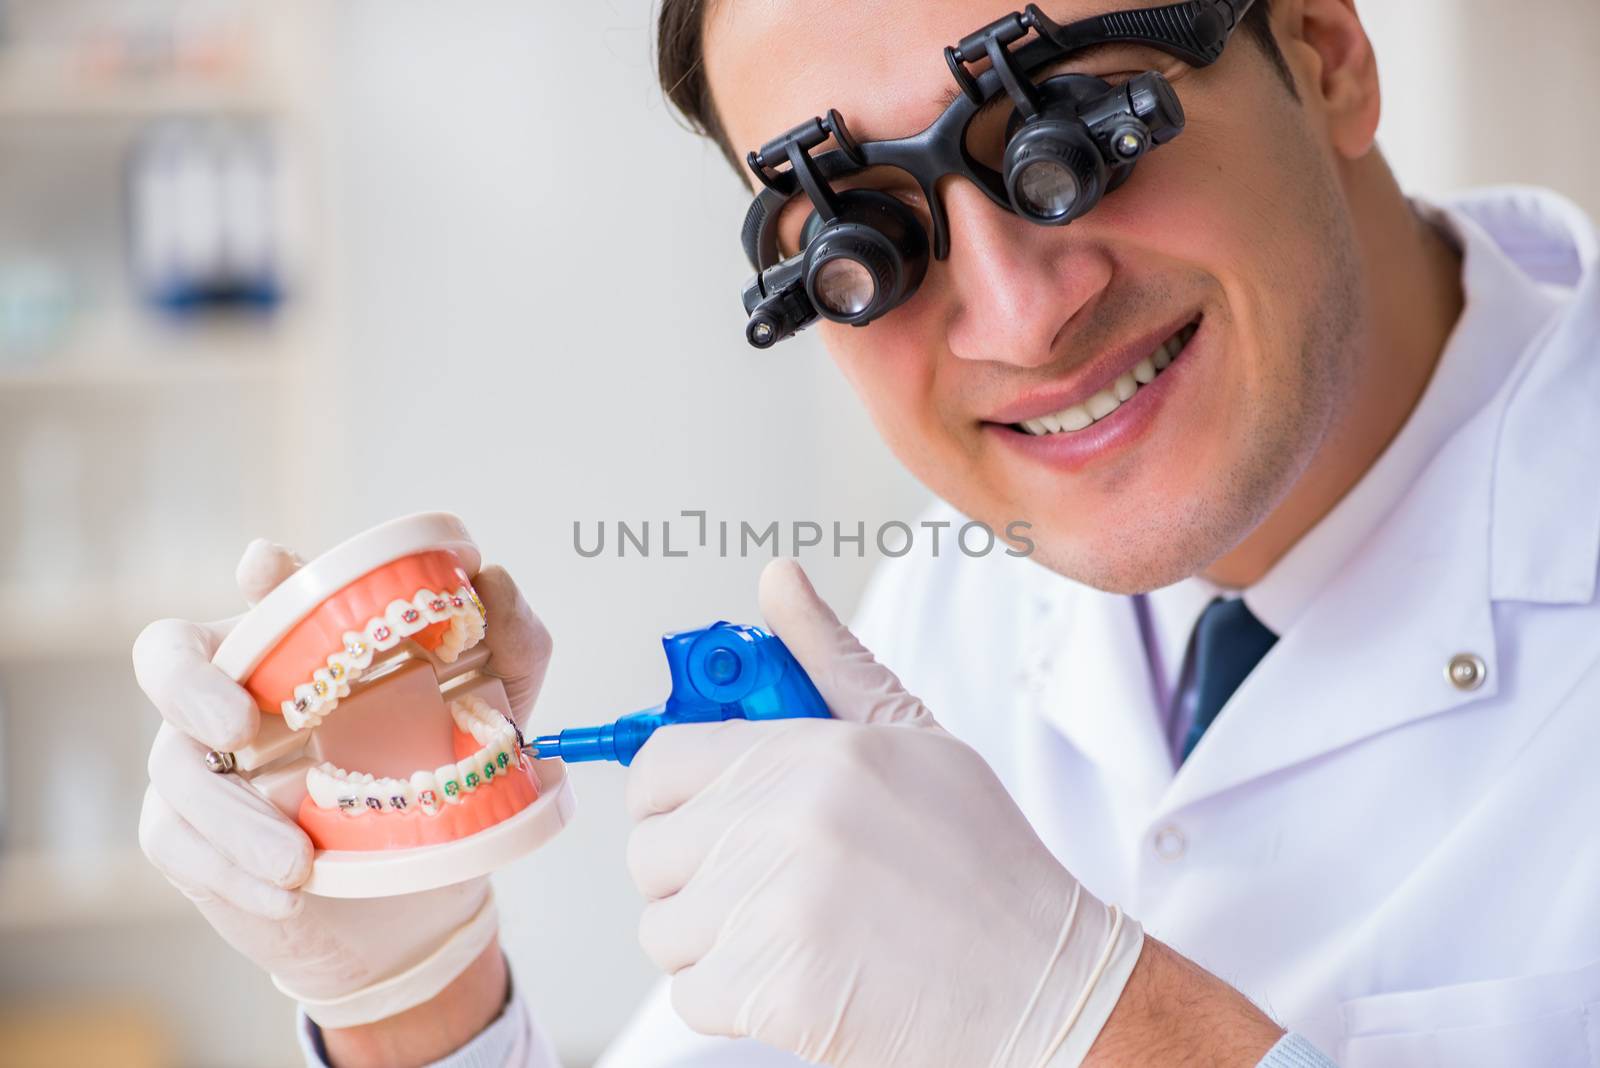 Young dentist working in the dentistry hospital